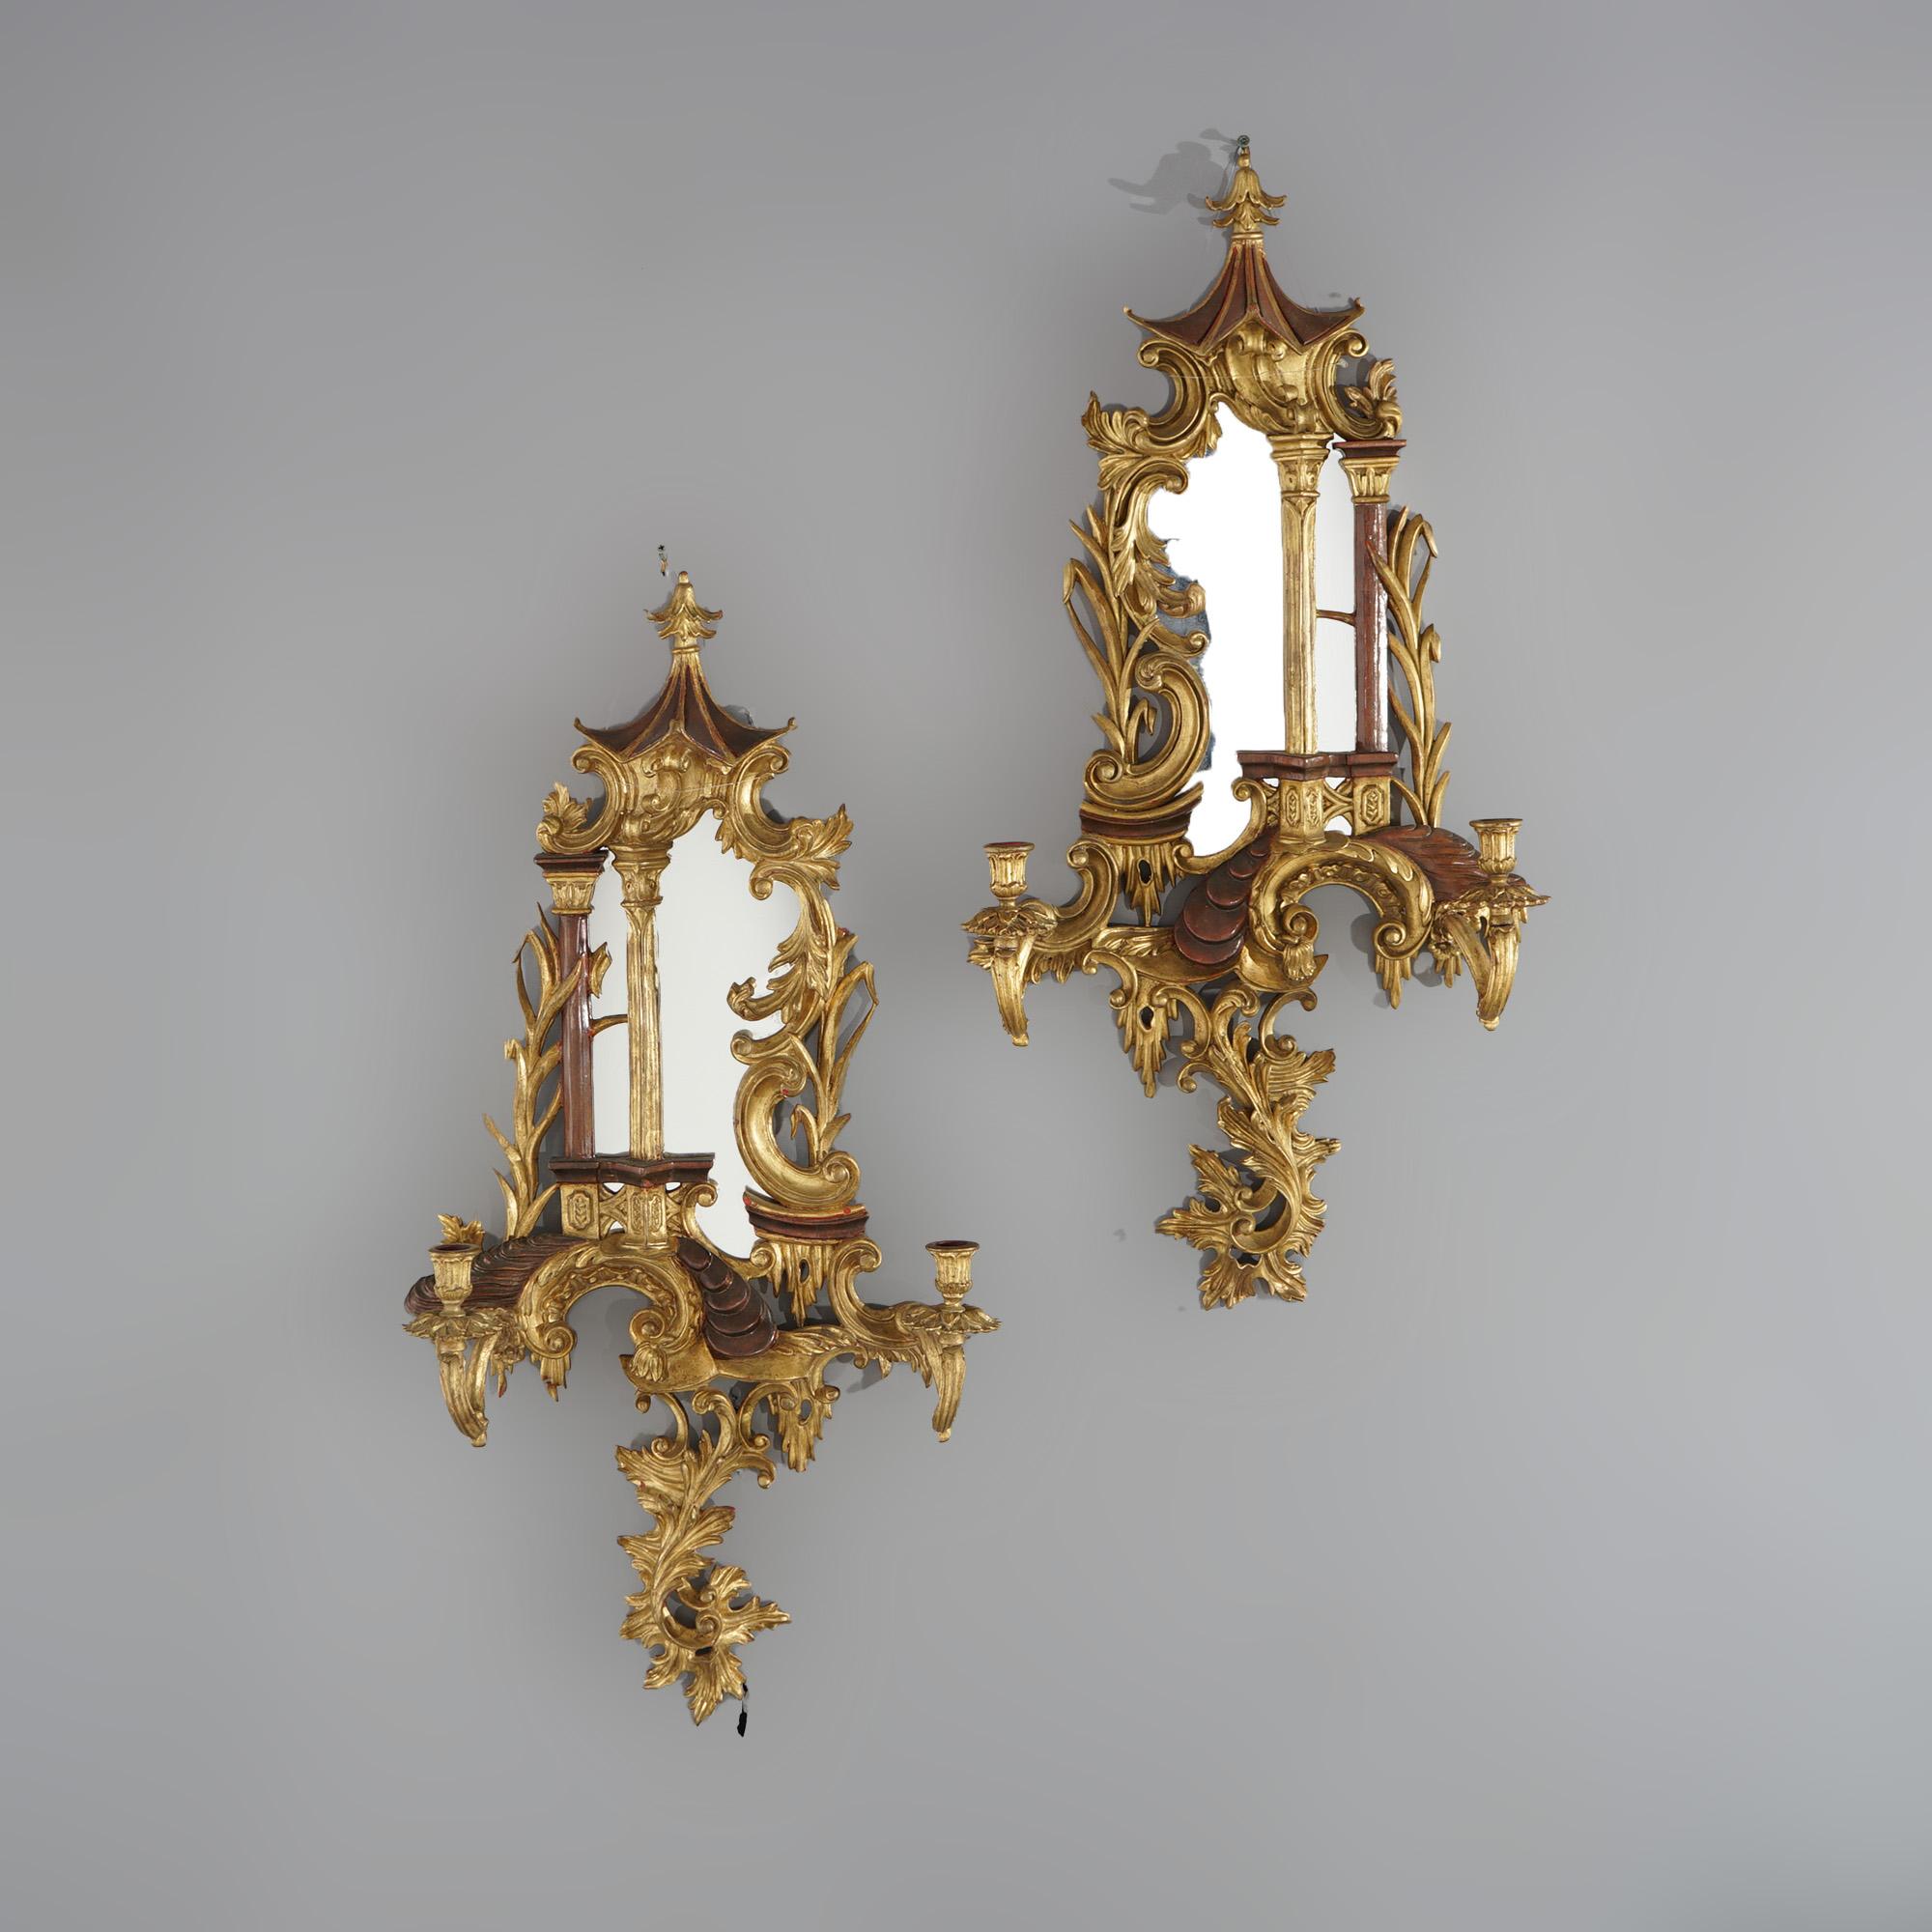 An antique pair of large English Chinese Chippendale wall sconces offer carved giltwood construction in pagoda form with polychromed finish, central mirror, foliate elements throughout and double scroll form arms terminating in candle sockets,